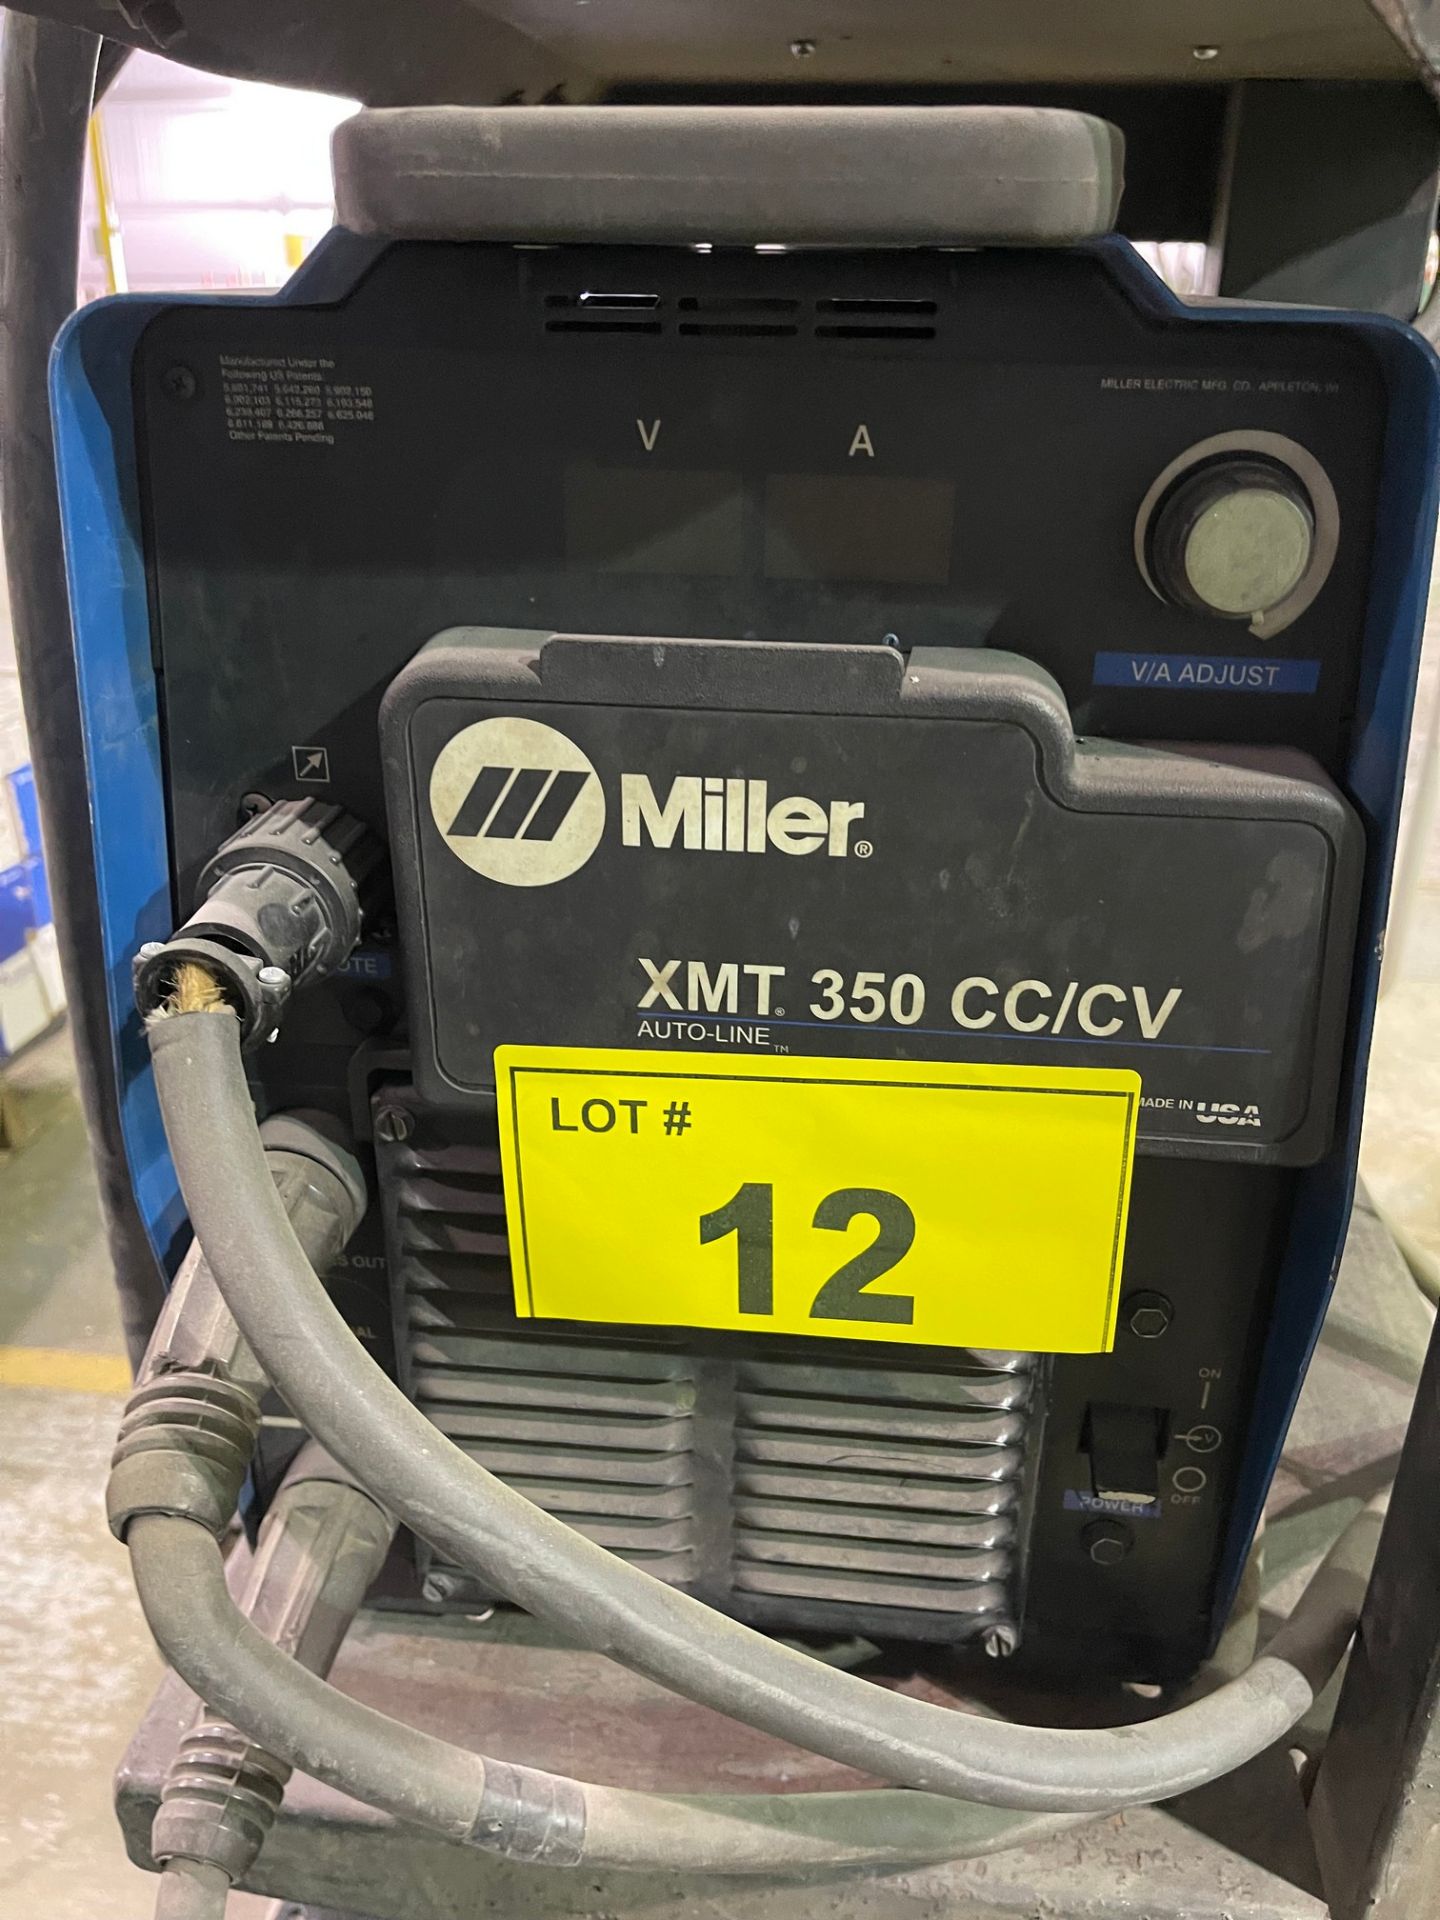 MILLER XMT 350 CC/CV WELDER W/ MILLER XR-D WIRE FEED CONTROL, S/N: LG010641A (RIGGING FEE $25) - Image 2 of 7